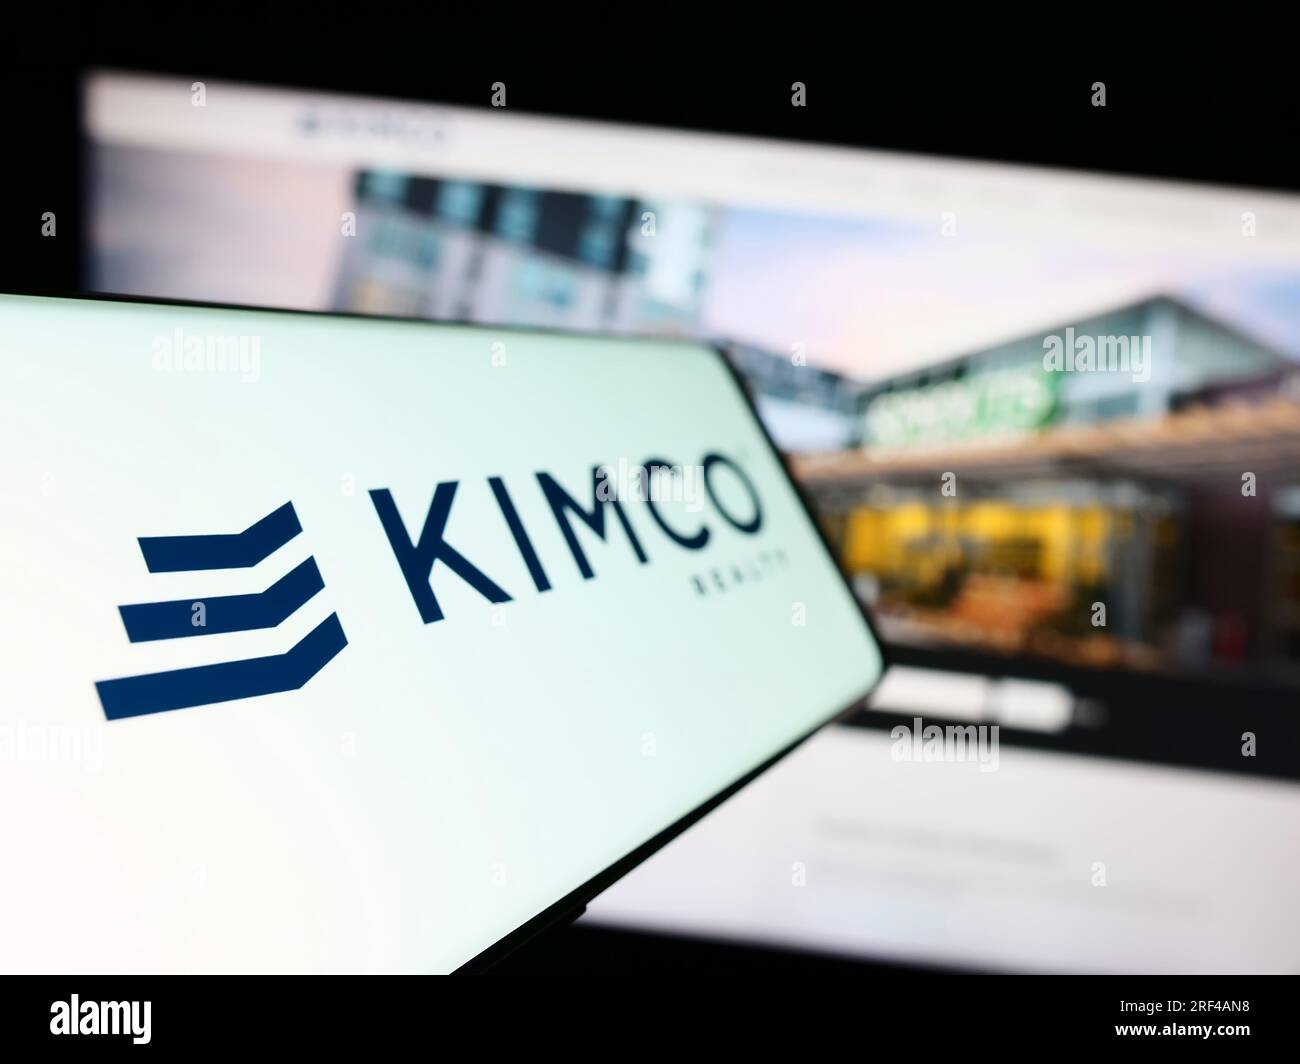 Cellphone with logo of American real estate company Kimco Realty Corporation on screen in front of website. Focus on left of phone display. Stock Photo